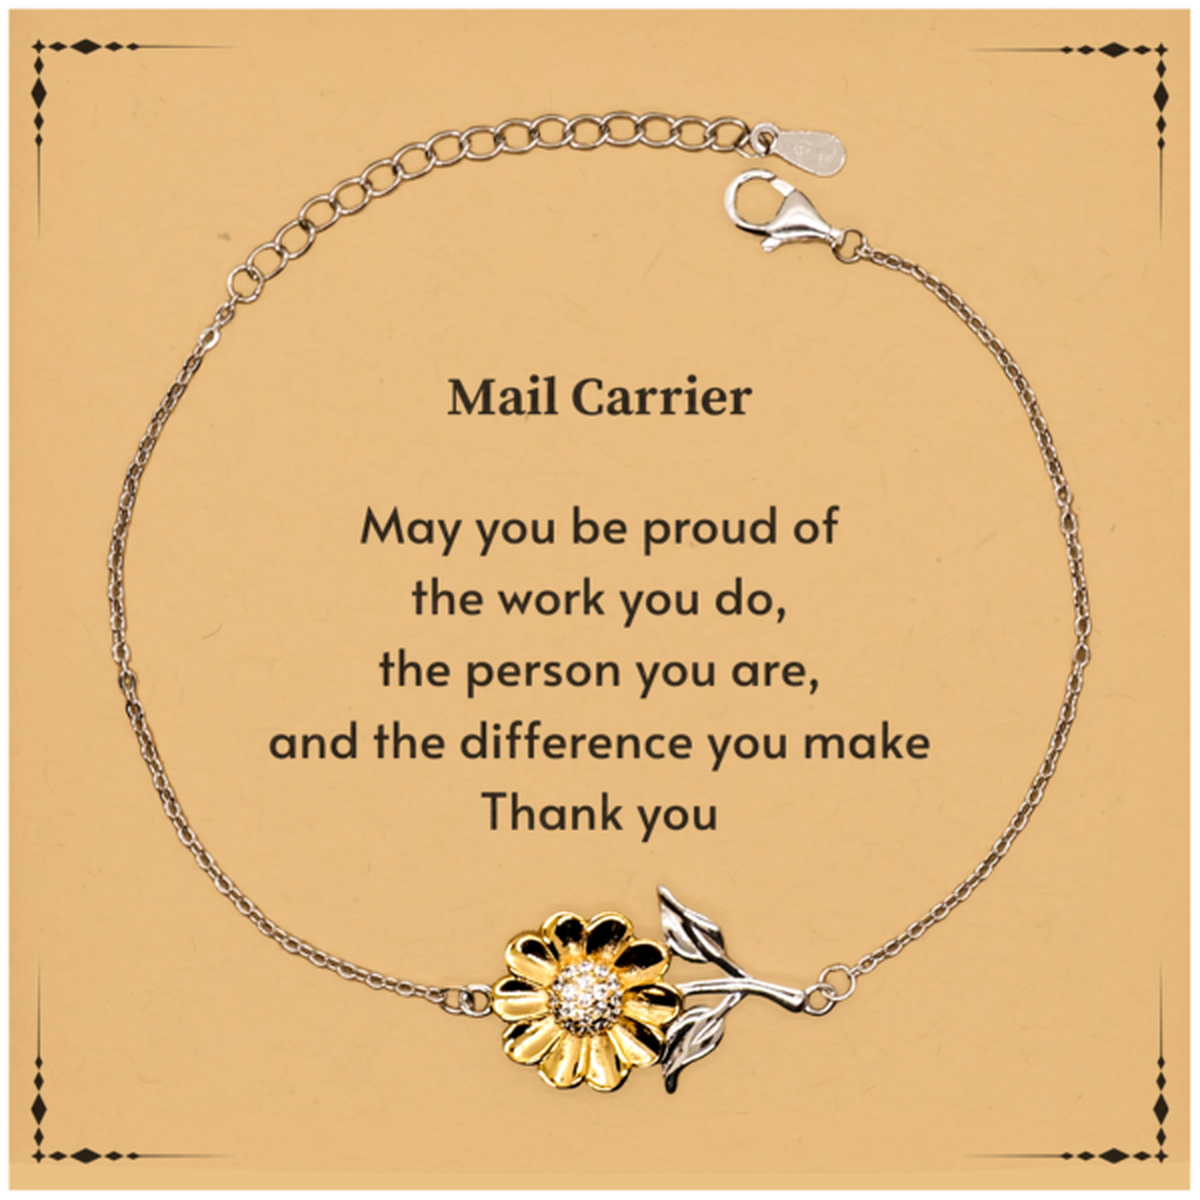 Heartwarming Sunflower Bracelet Retirement Coworkers Gifts for Mail Carrier, Mail Carrier May You be proud of the work you do, the person you are Gifts for Boss Men Women Friends